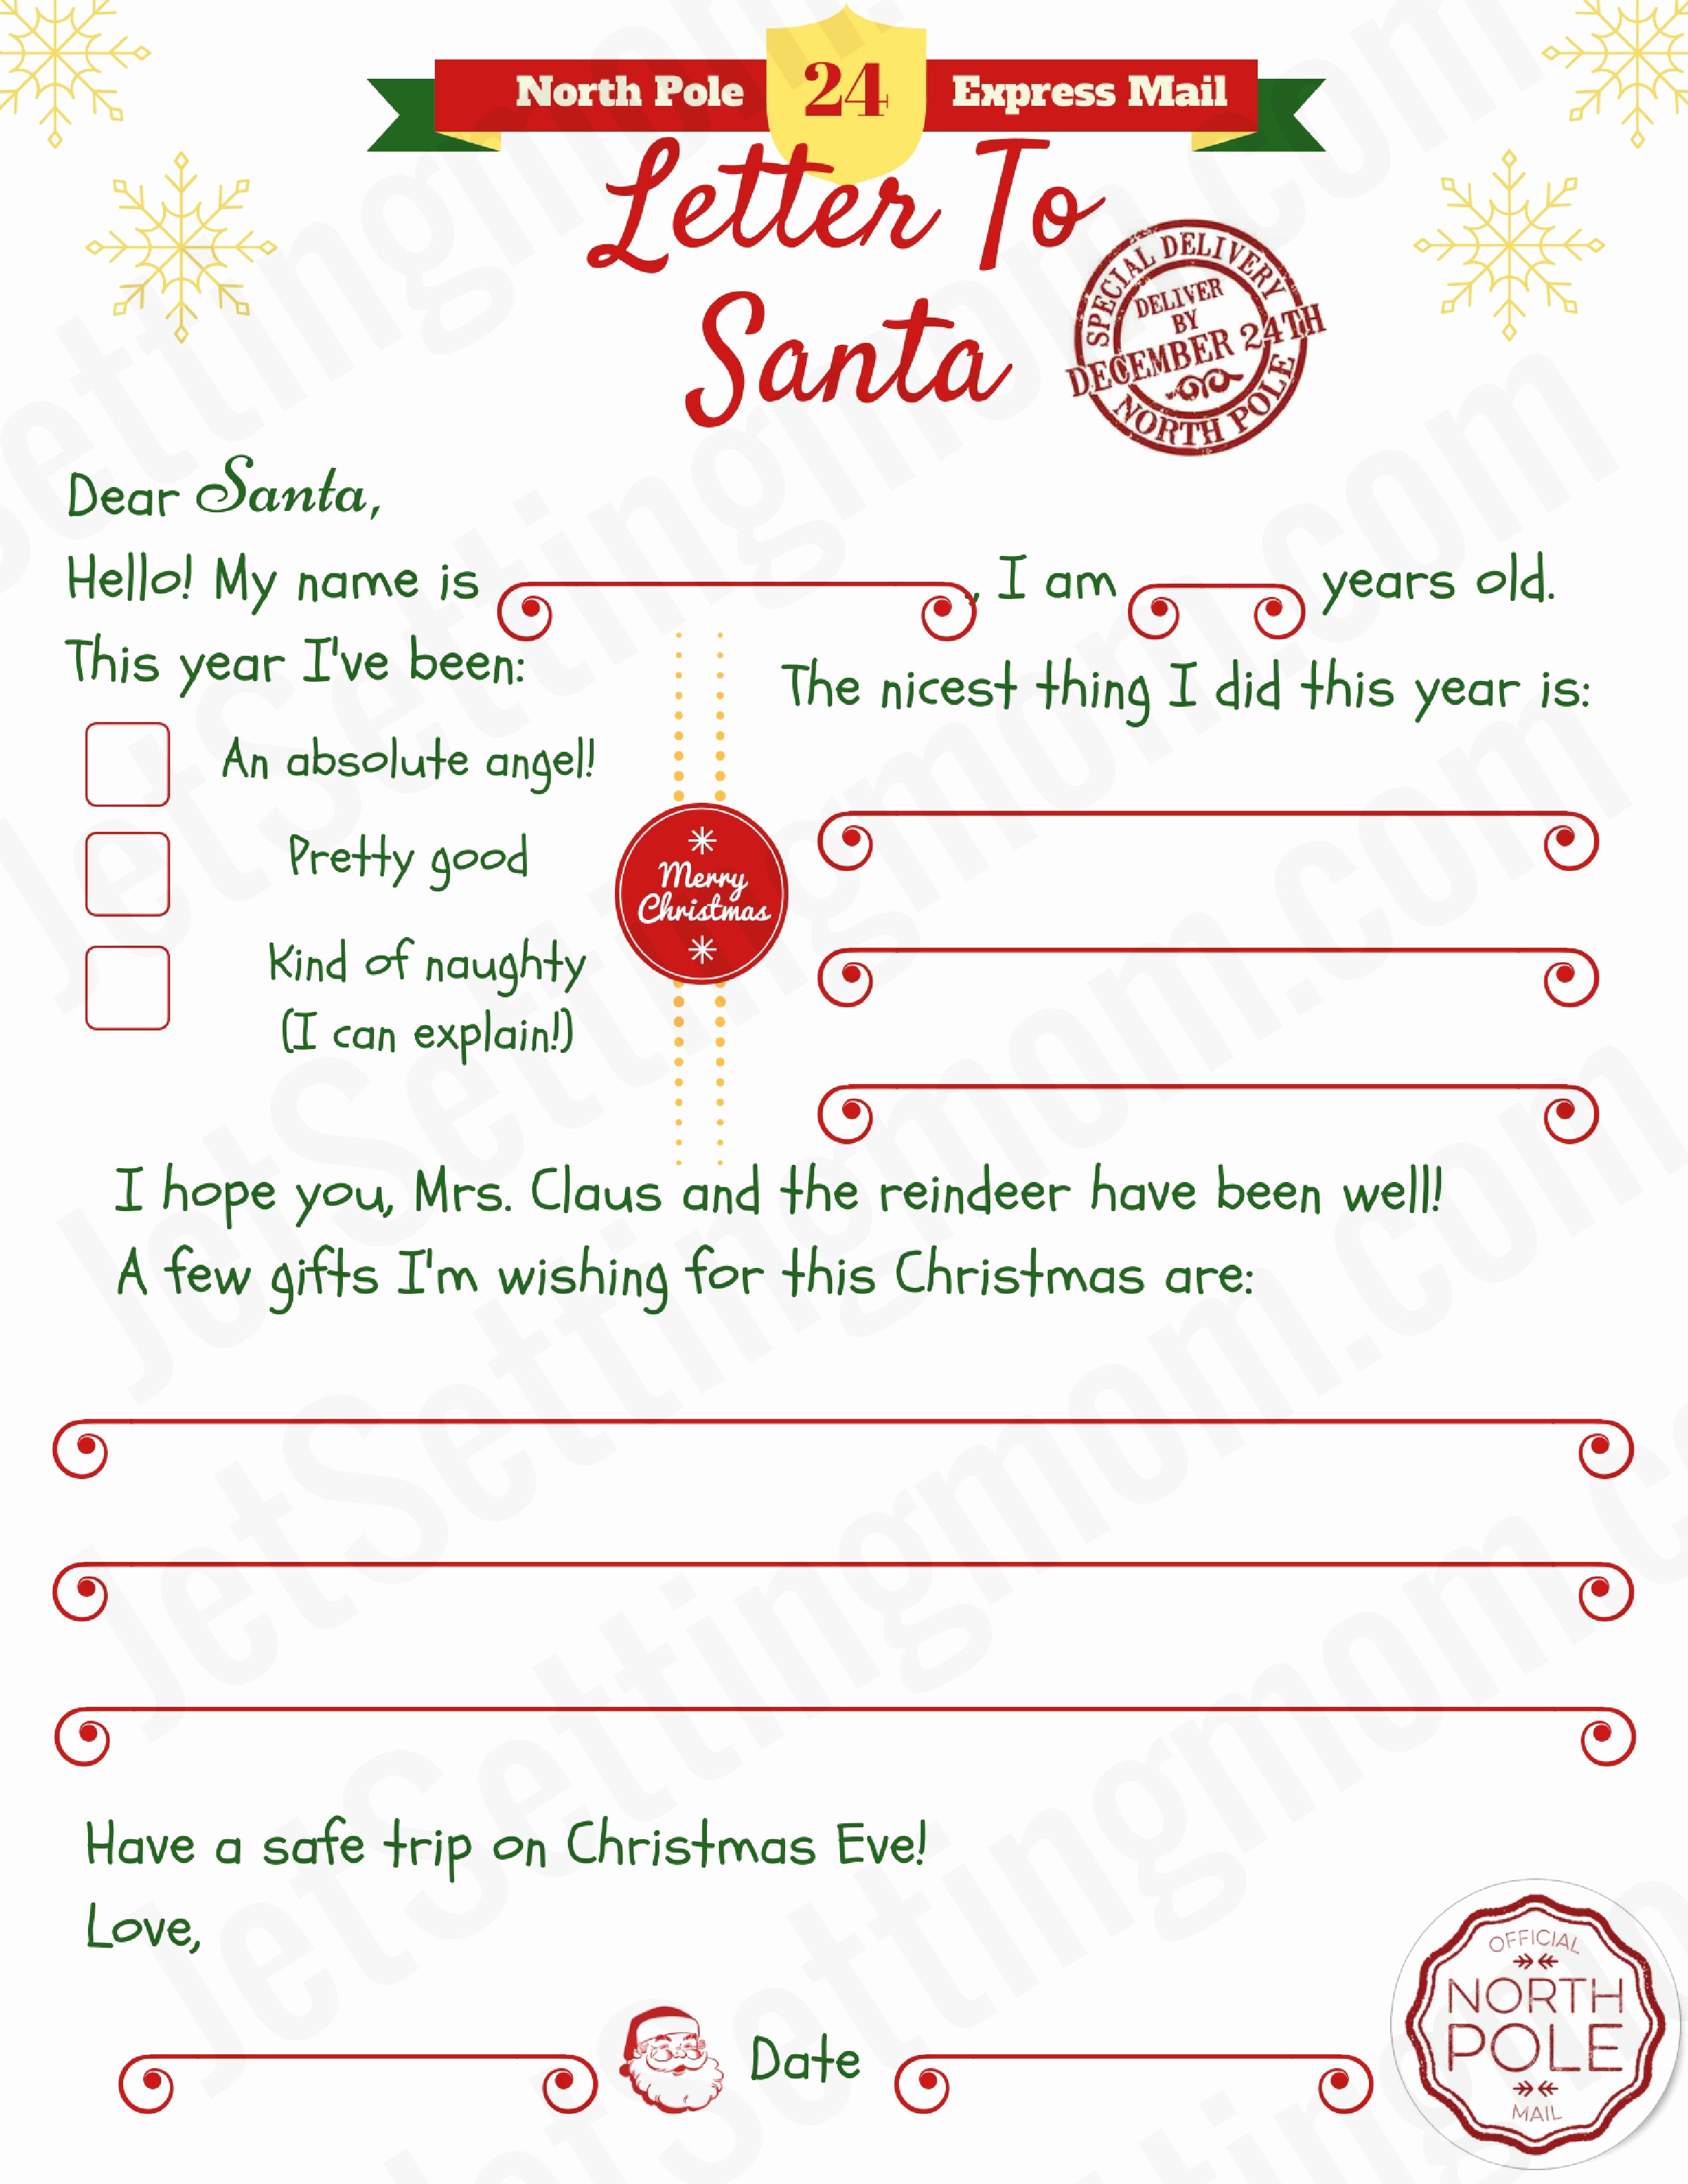 Letter to Santa Claus Templates Best Of Free Printable Letter to Santa Template Writing to Santa